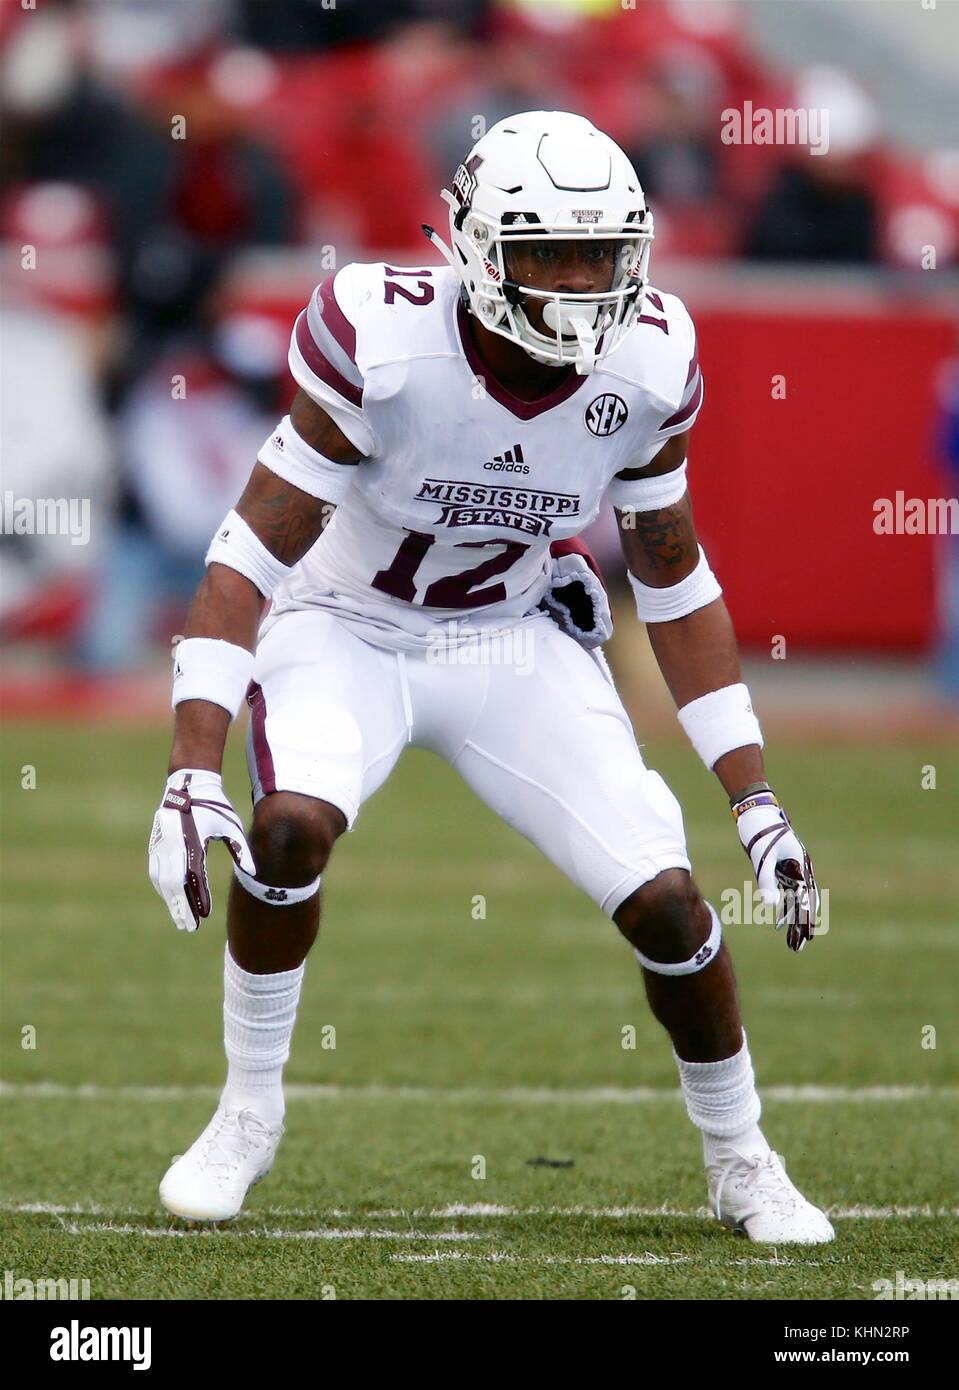 Nov 18, 2017: Mississippi State safety J.T. Gray #12 back peddles into position as the ball is snapped. The Mississippi State Bulldogs defeated the Arkansas Razorbacks 28-21 at Donald W. Reynolds Stadium in Fayetteville, AR, Richey Miller/CSM Stock Photo